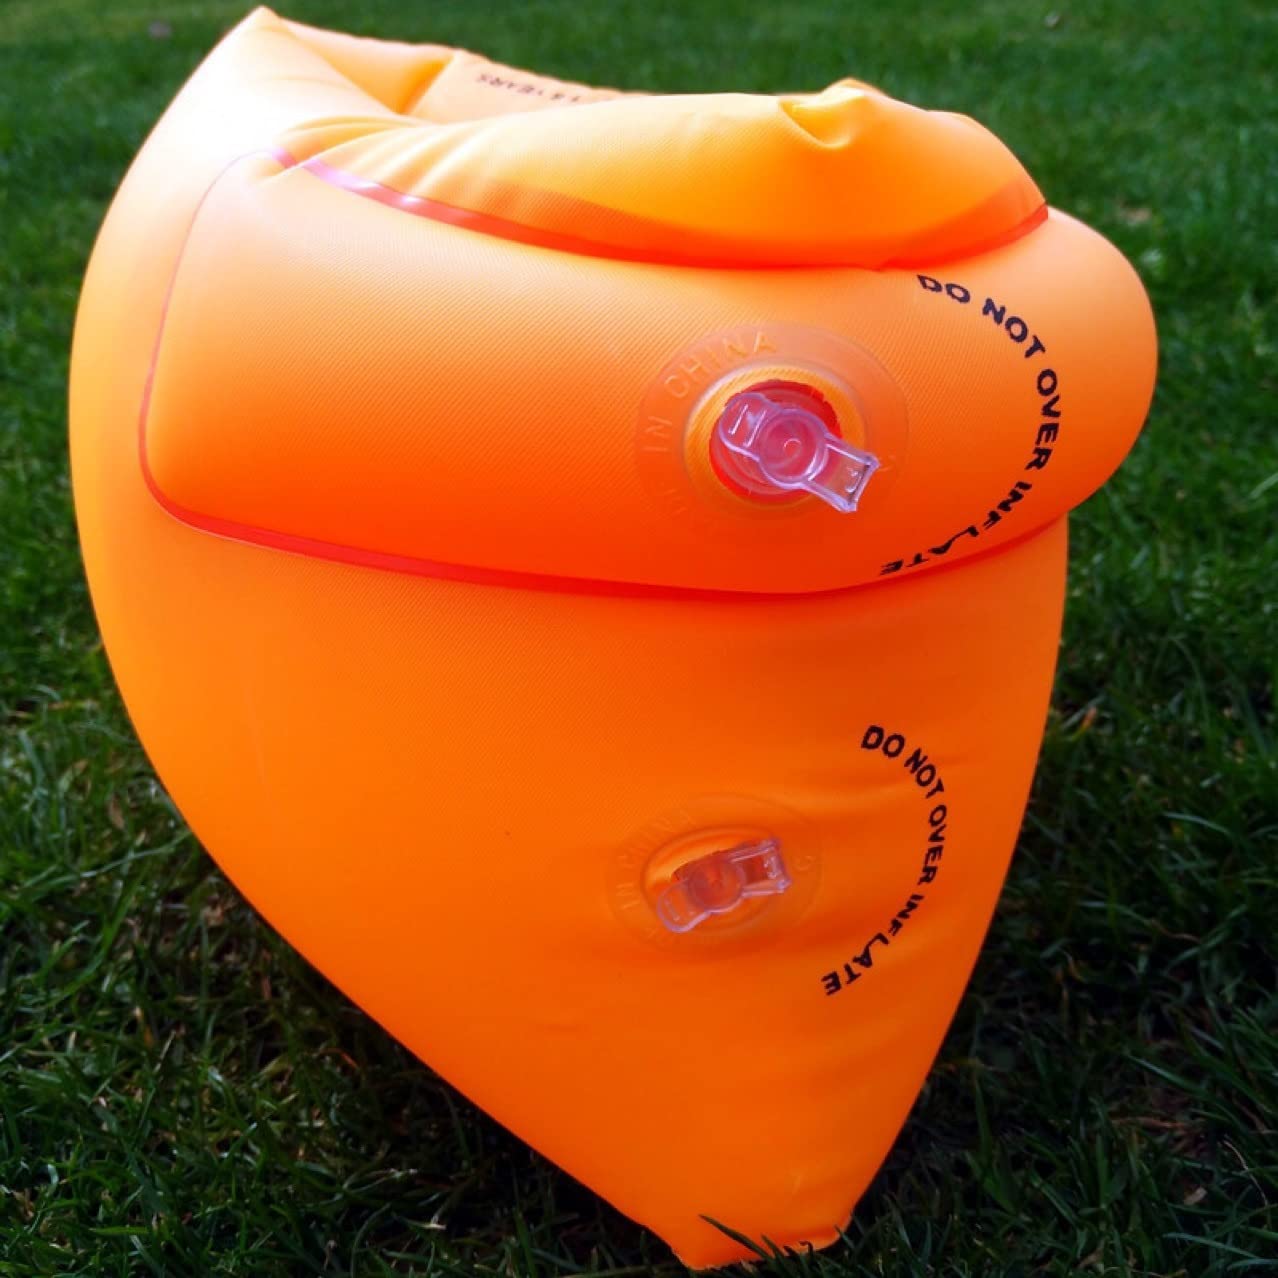 Inflatable Arm Swimming Floats Bands Floatation Water Wings Swimming Arm Ring Floatie for Children and Adults Orange